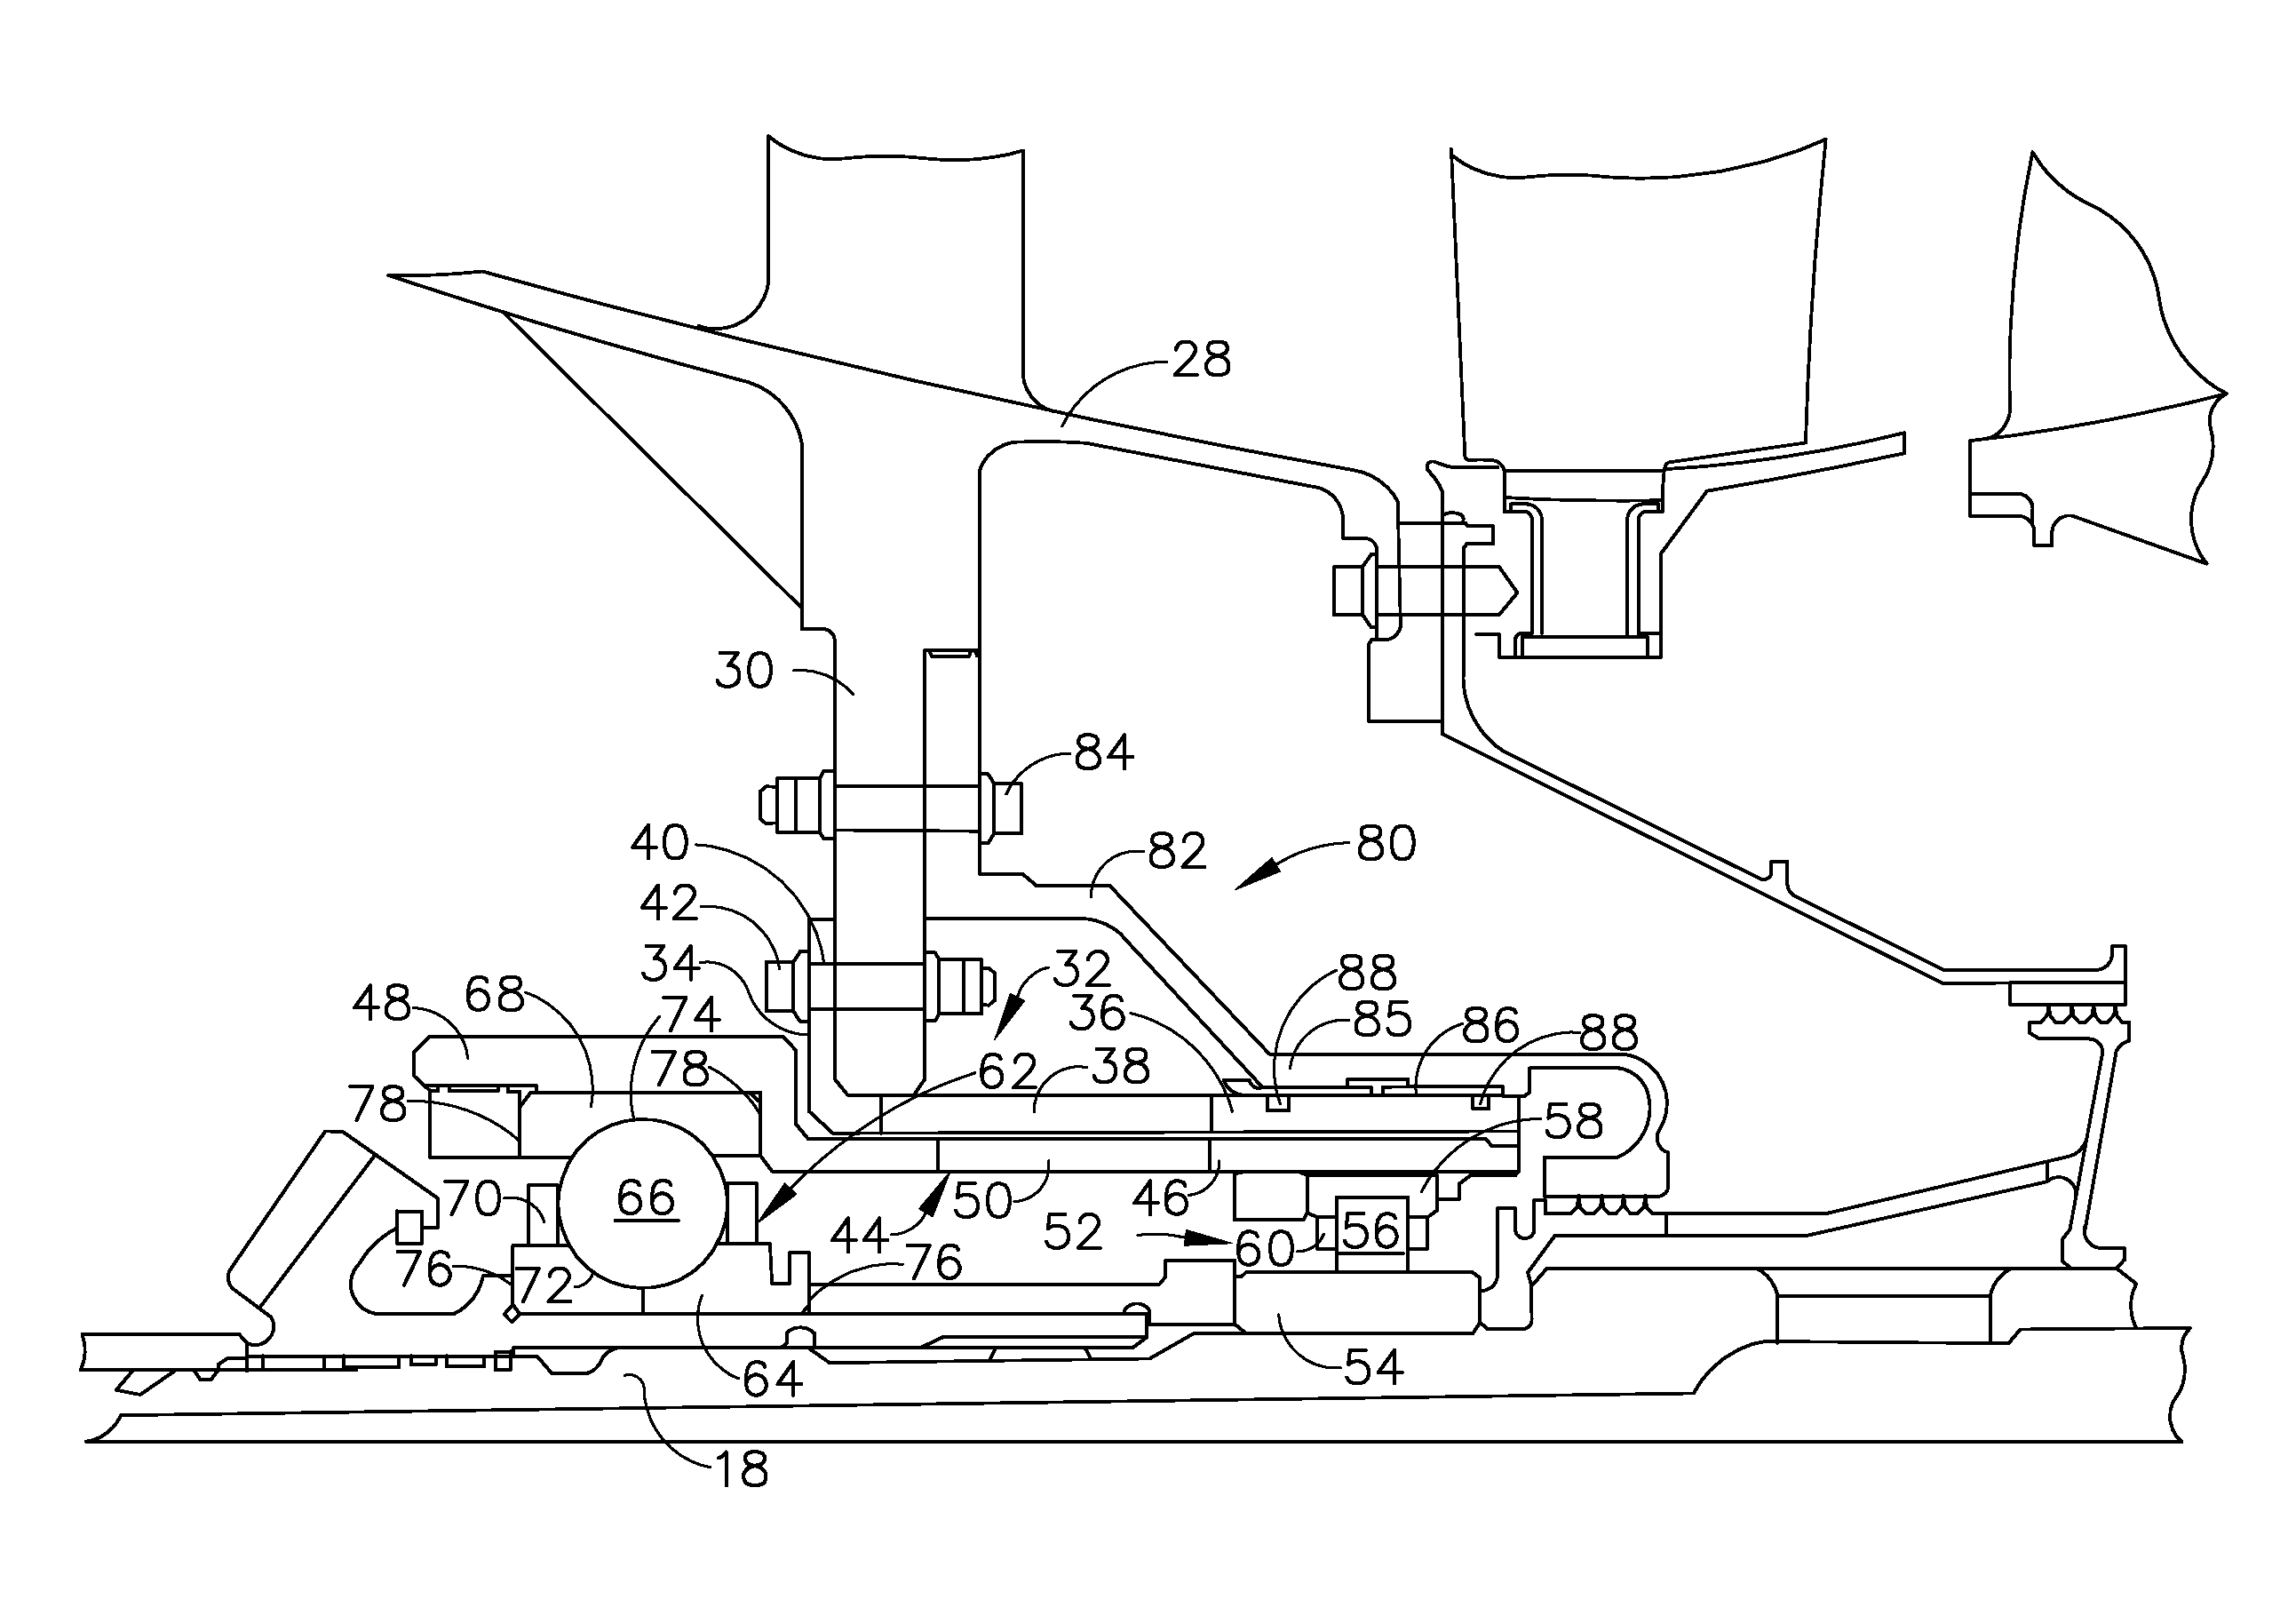 Series bearing support apparatus for a gas turbine engine